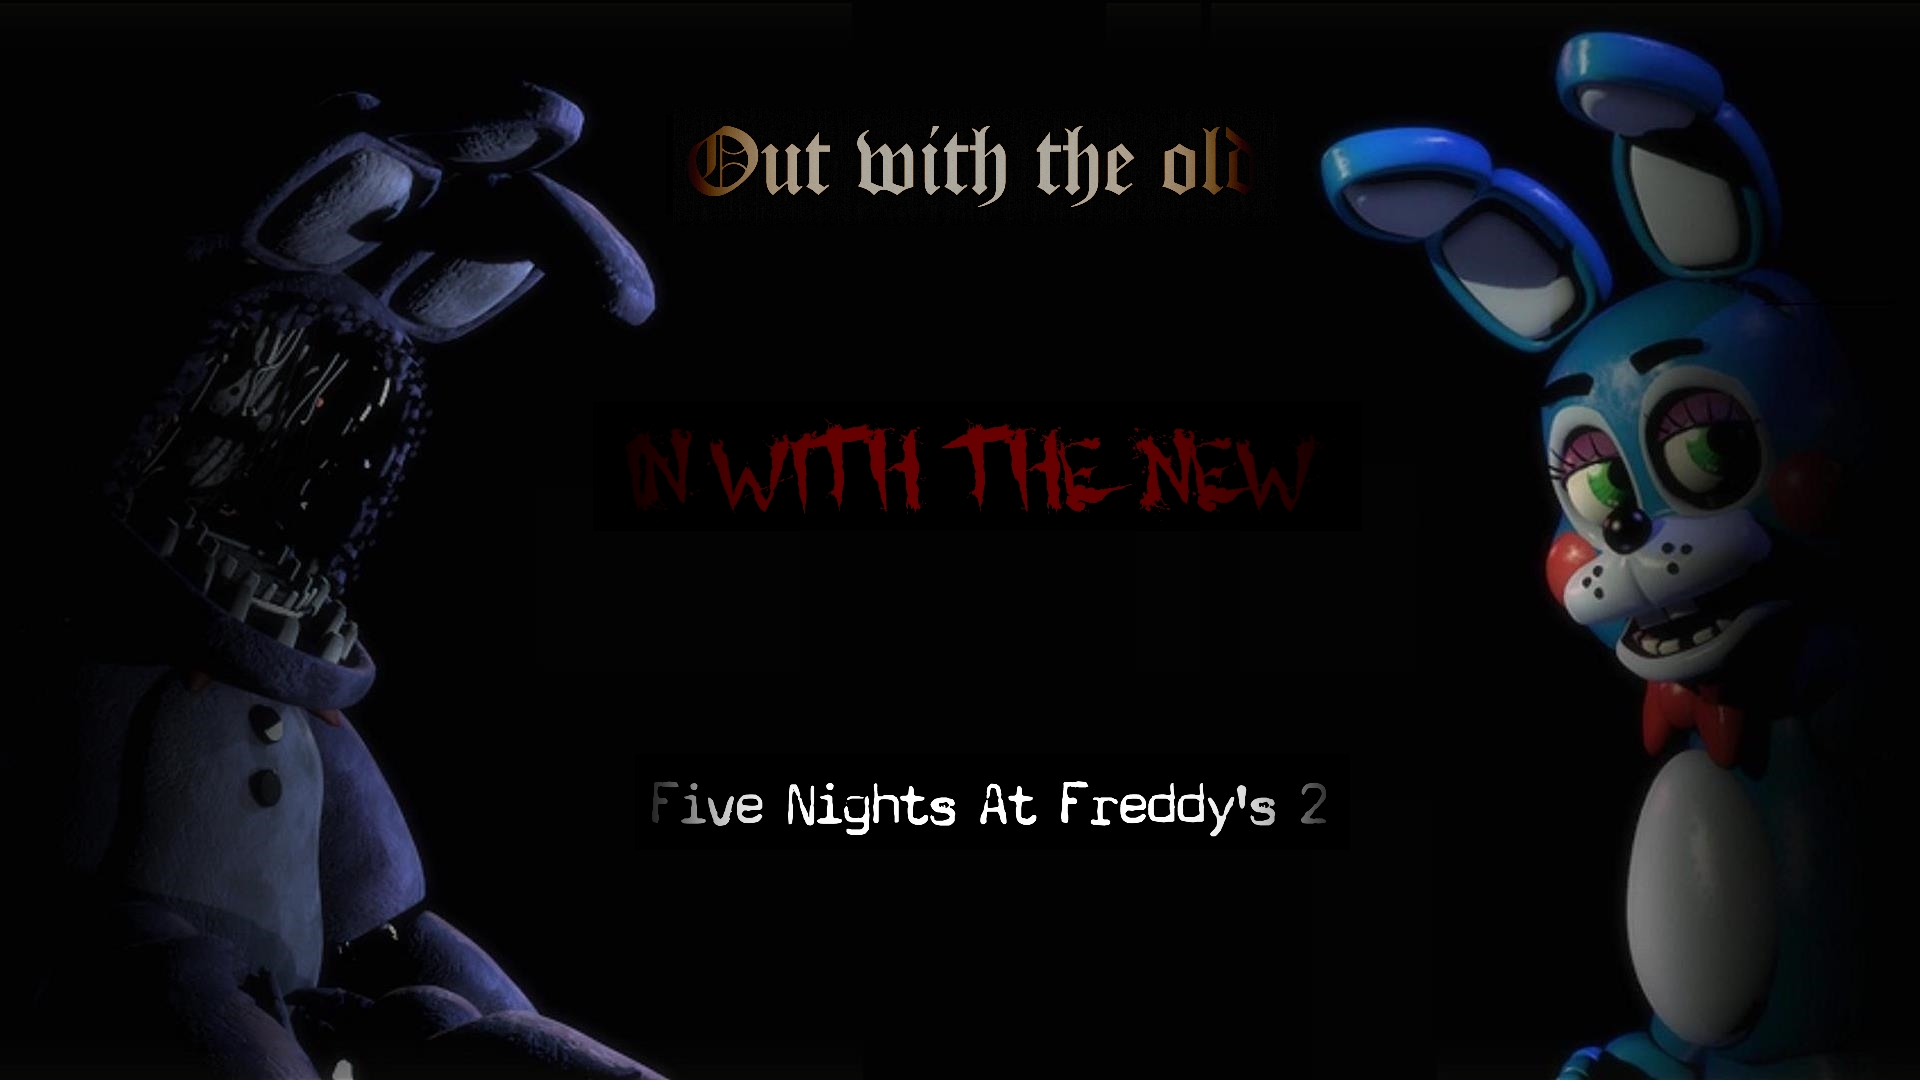 Freddys At Five Nights Cheats Background